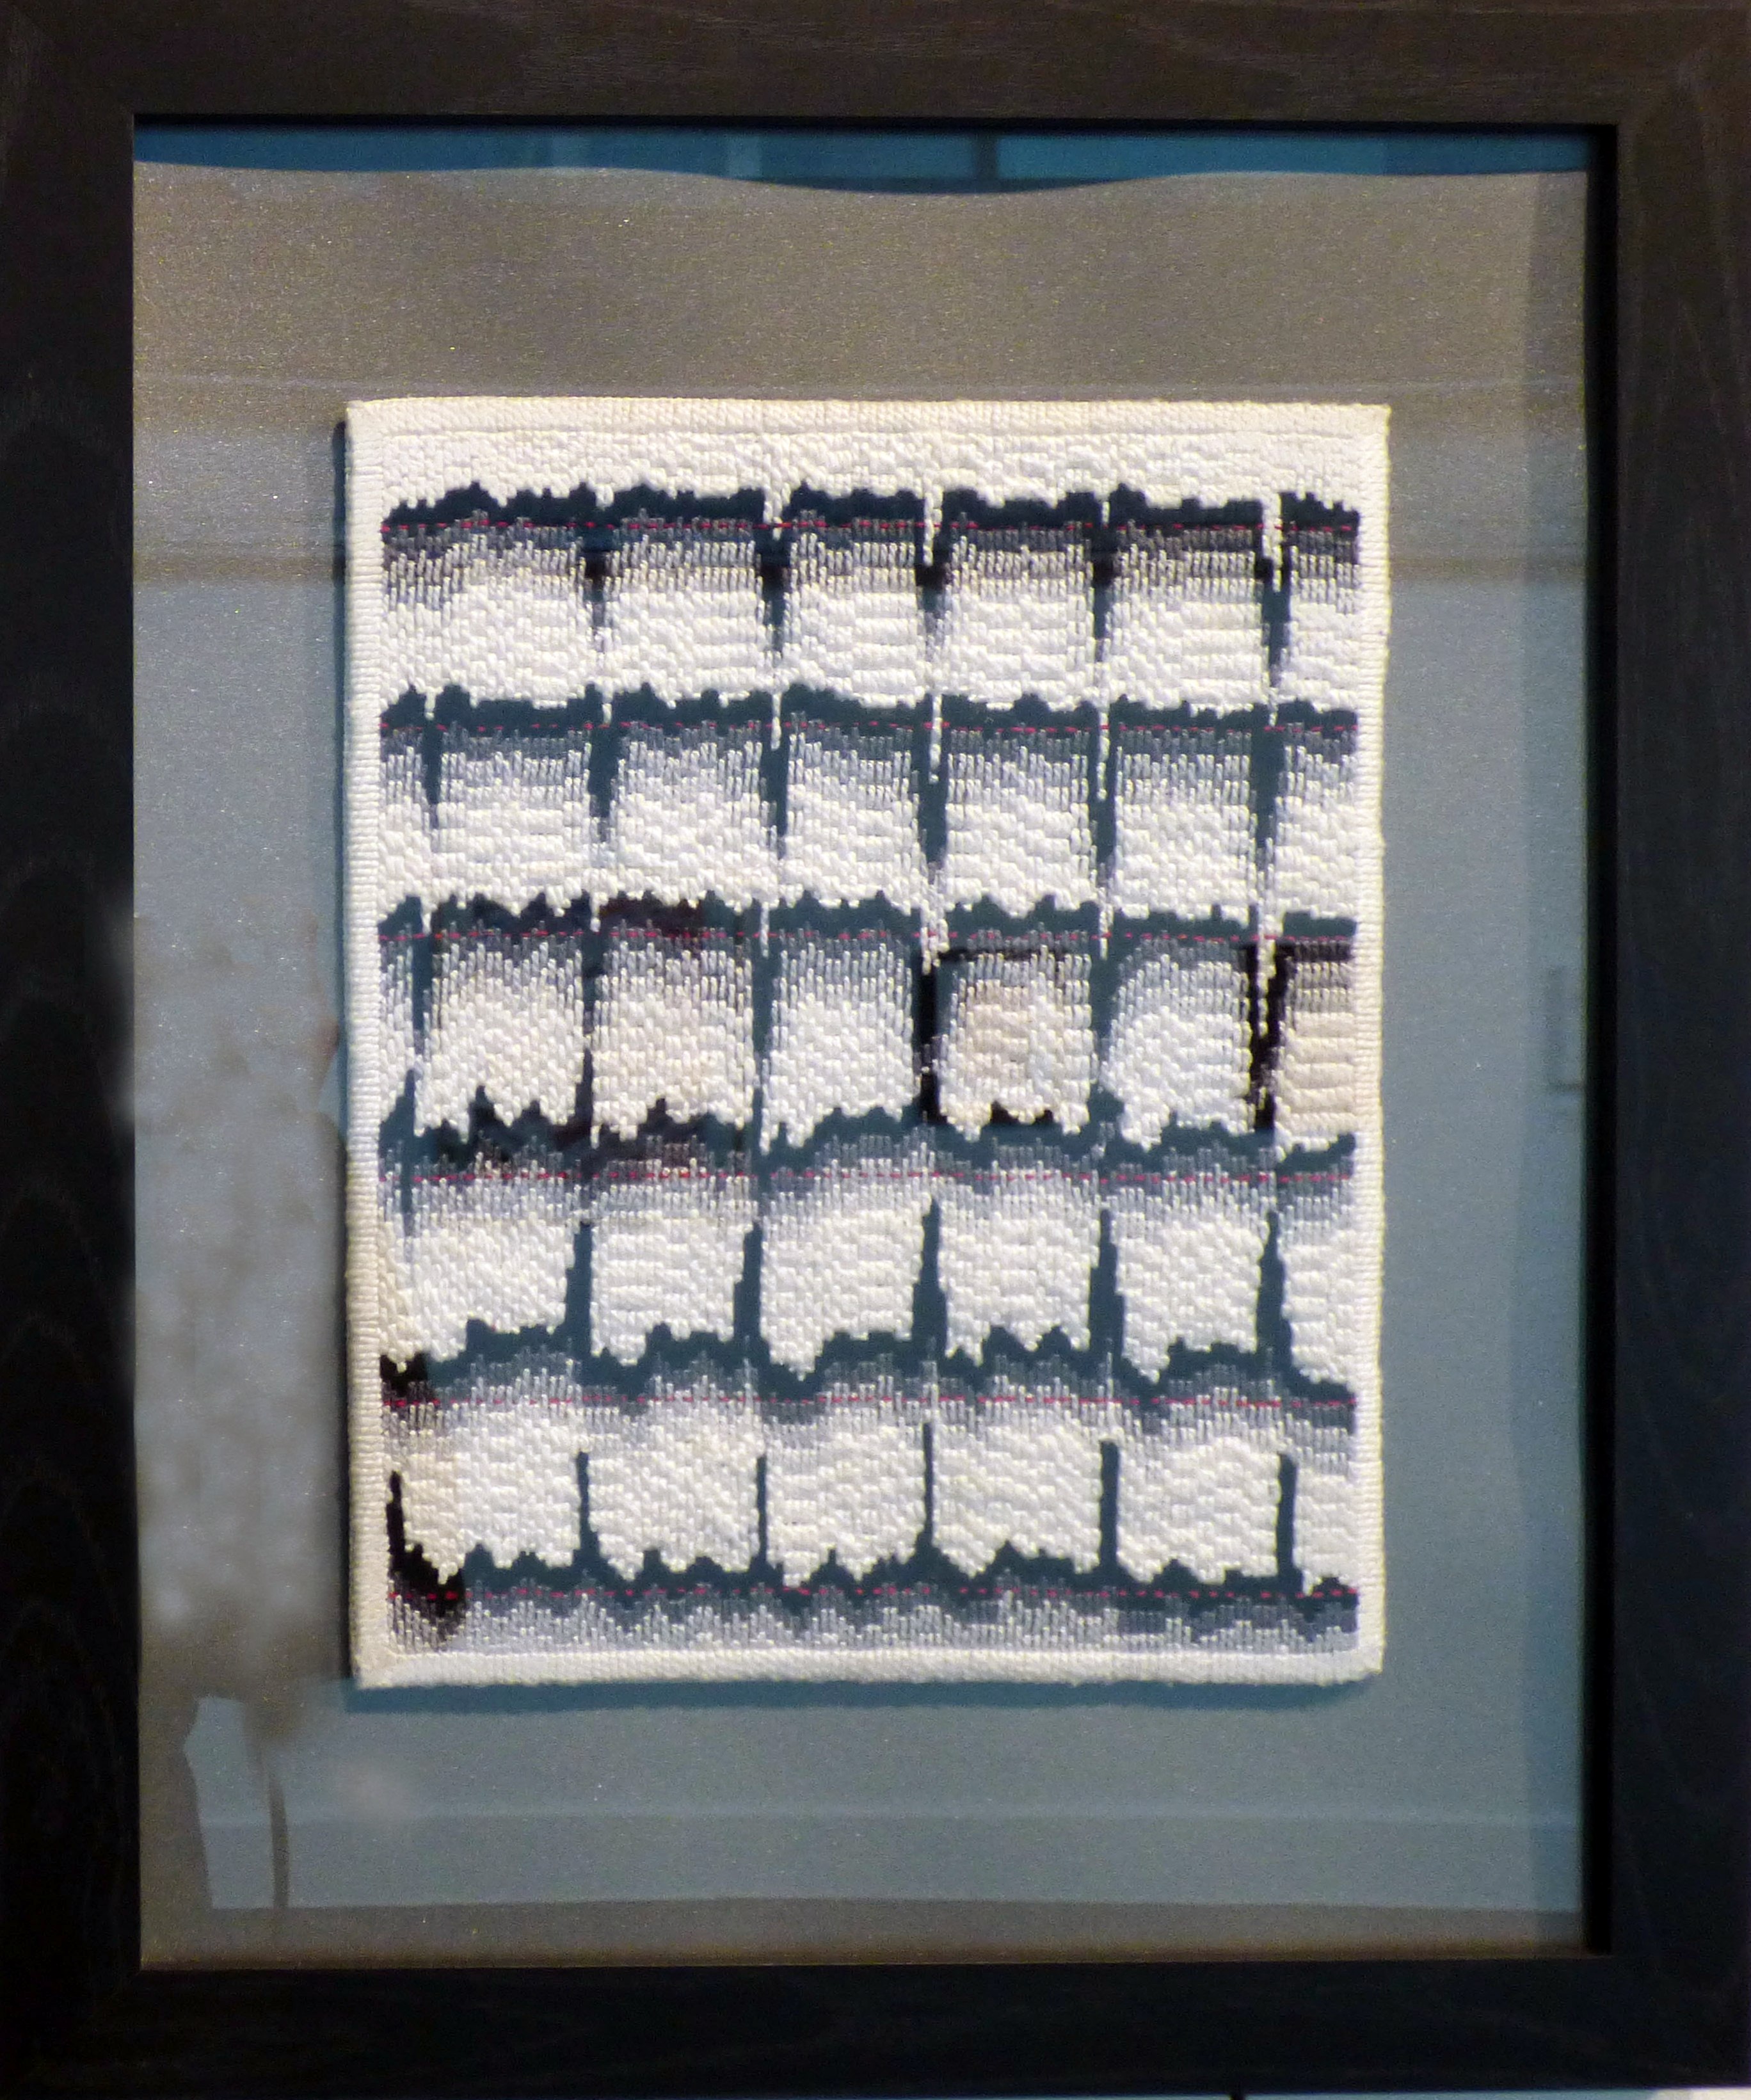 IN A HEARTBEAT by Karen Scott, Florentine stitch style canvas work embroidery in cotton thread. From The Heart exhibition, St Helens, Feb 2020